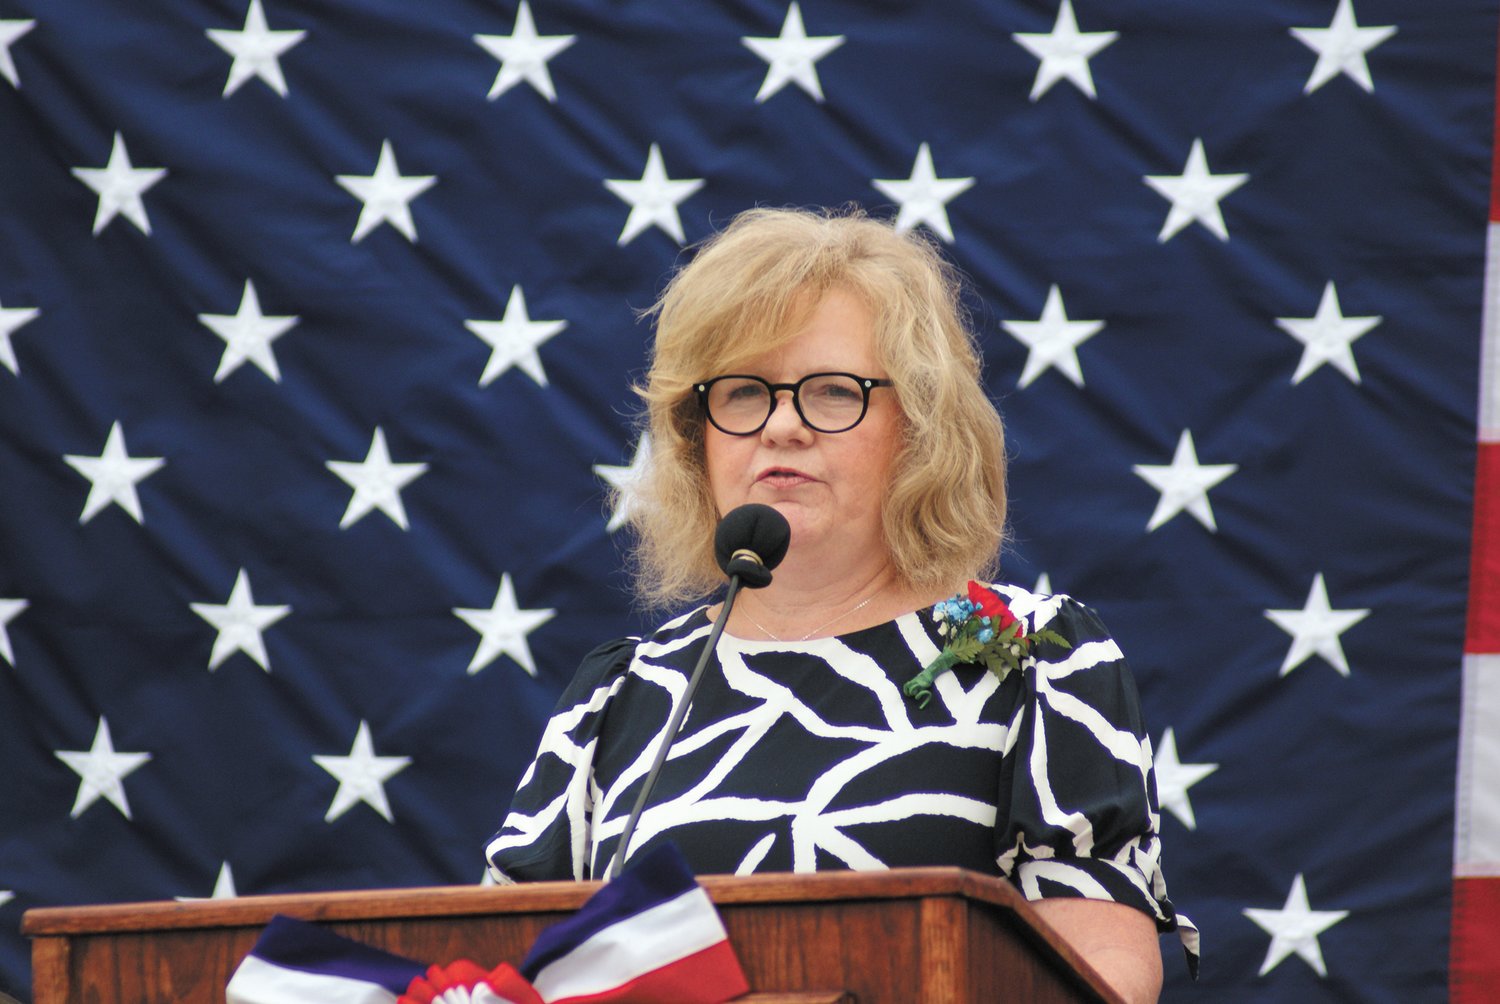 GREETINGS: Park View Middle School Principal Cheryl Anderson gave greetings at last Friday’s Memorial Day Ceremony at the school.